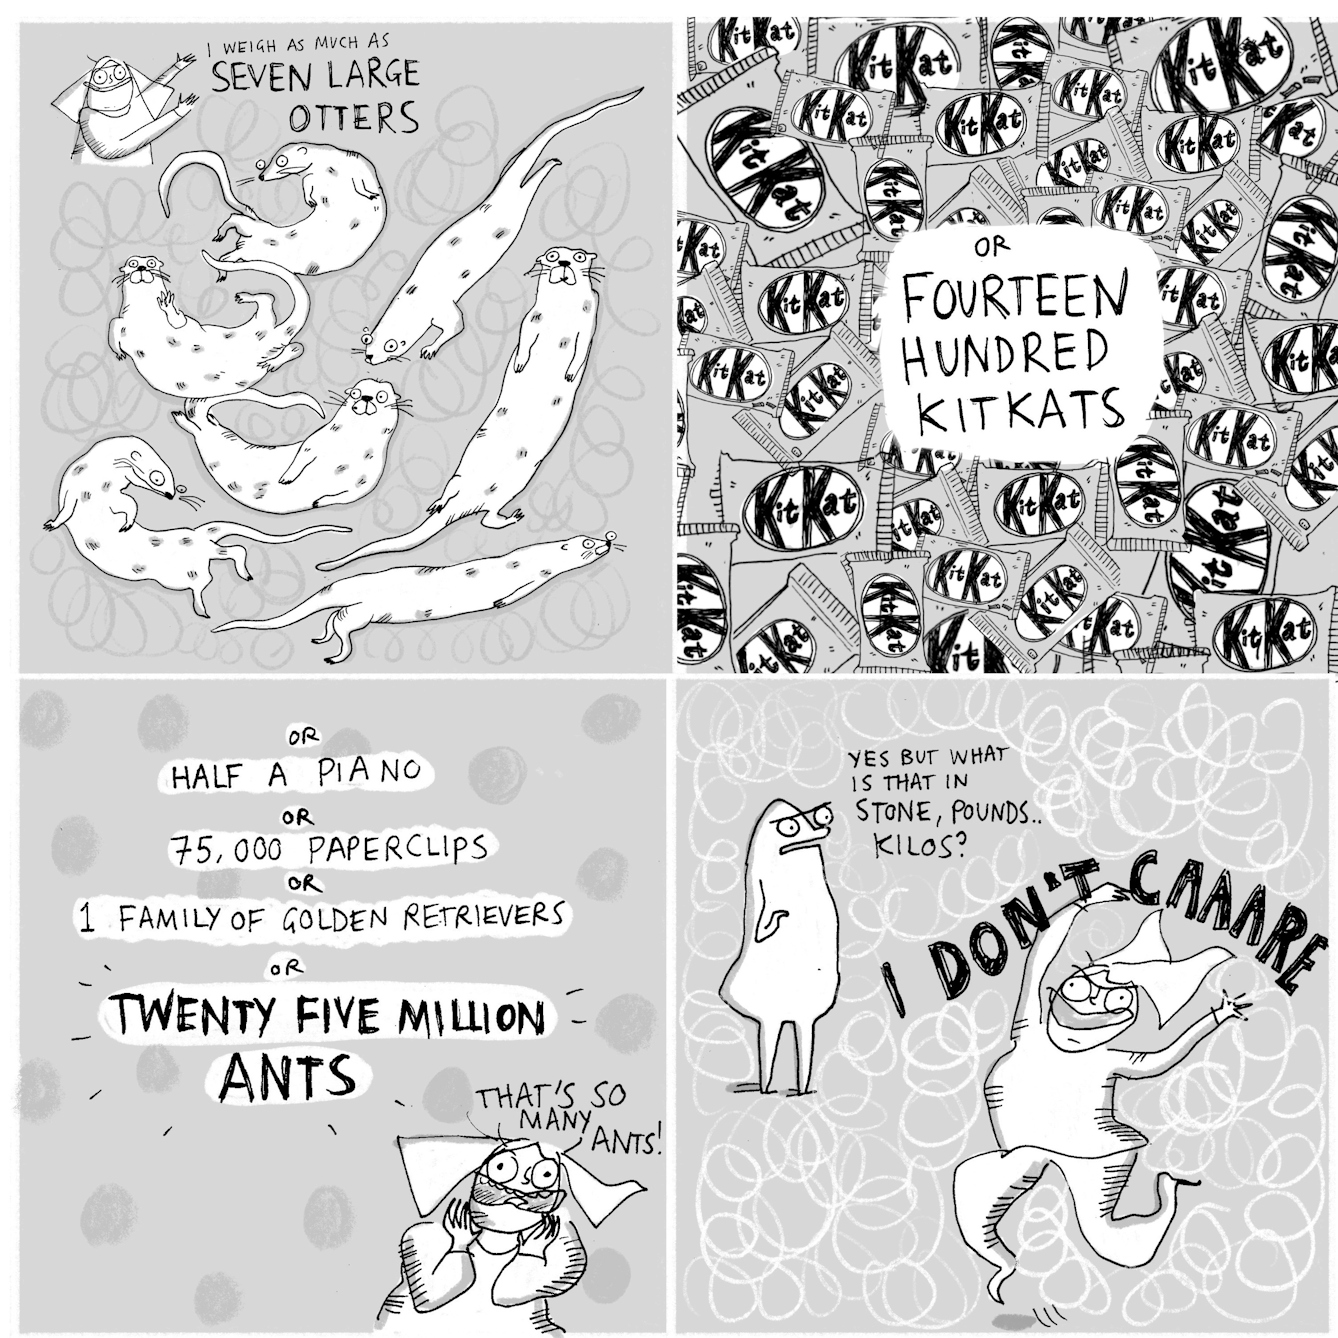 Web comic comprising four panels showing a woman comparing her weight to a range of animals and other items including Otters, Kit Kats, a piano, paperclips, Golden Retrievers and ants.  